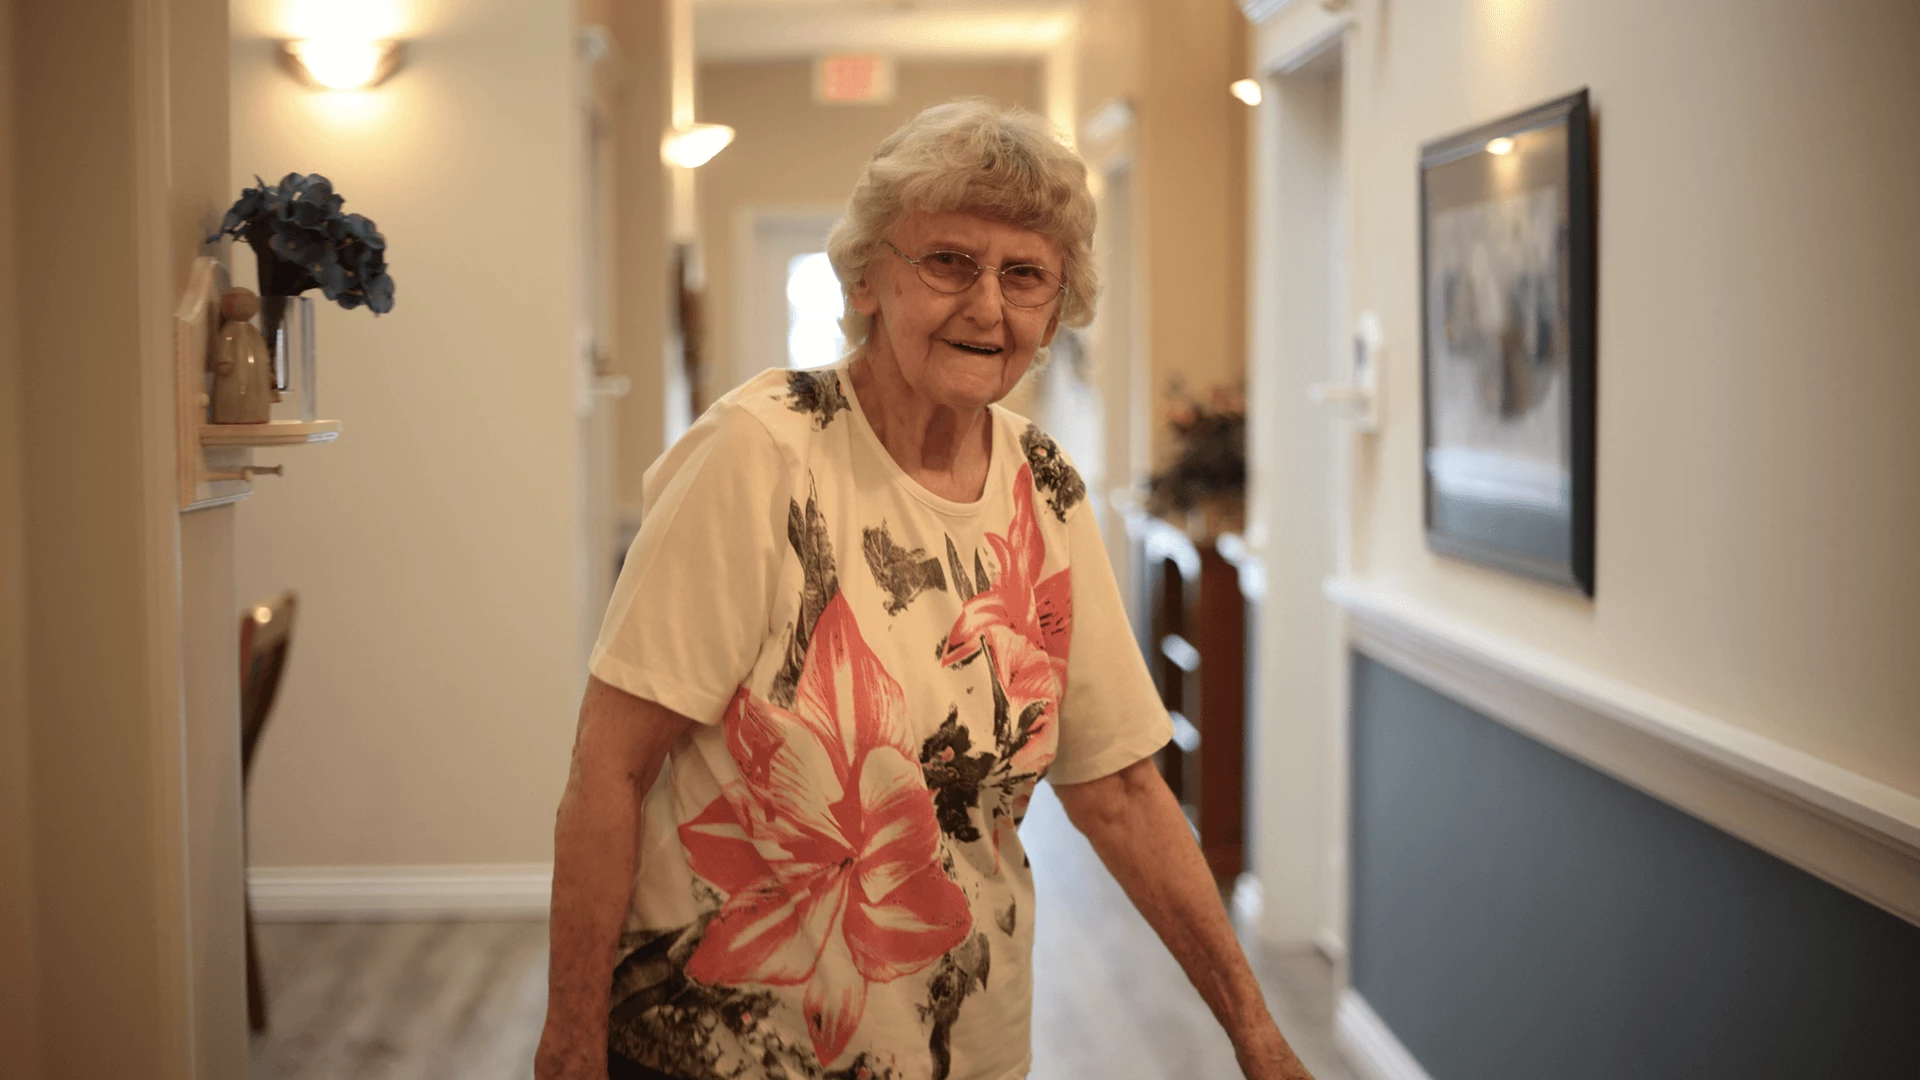 Senior woman standing in hallway, smiling at the camera